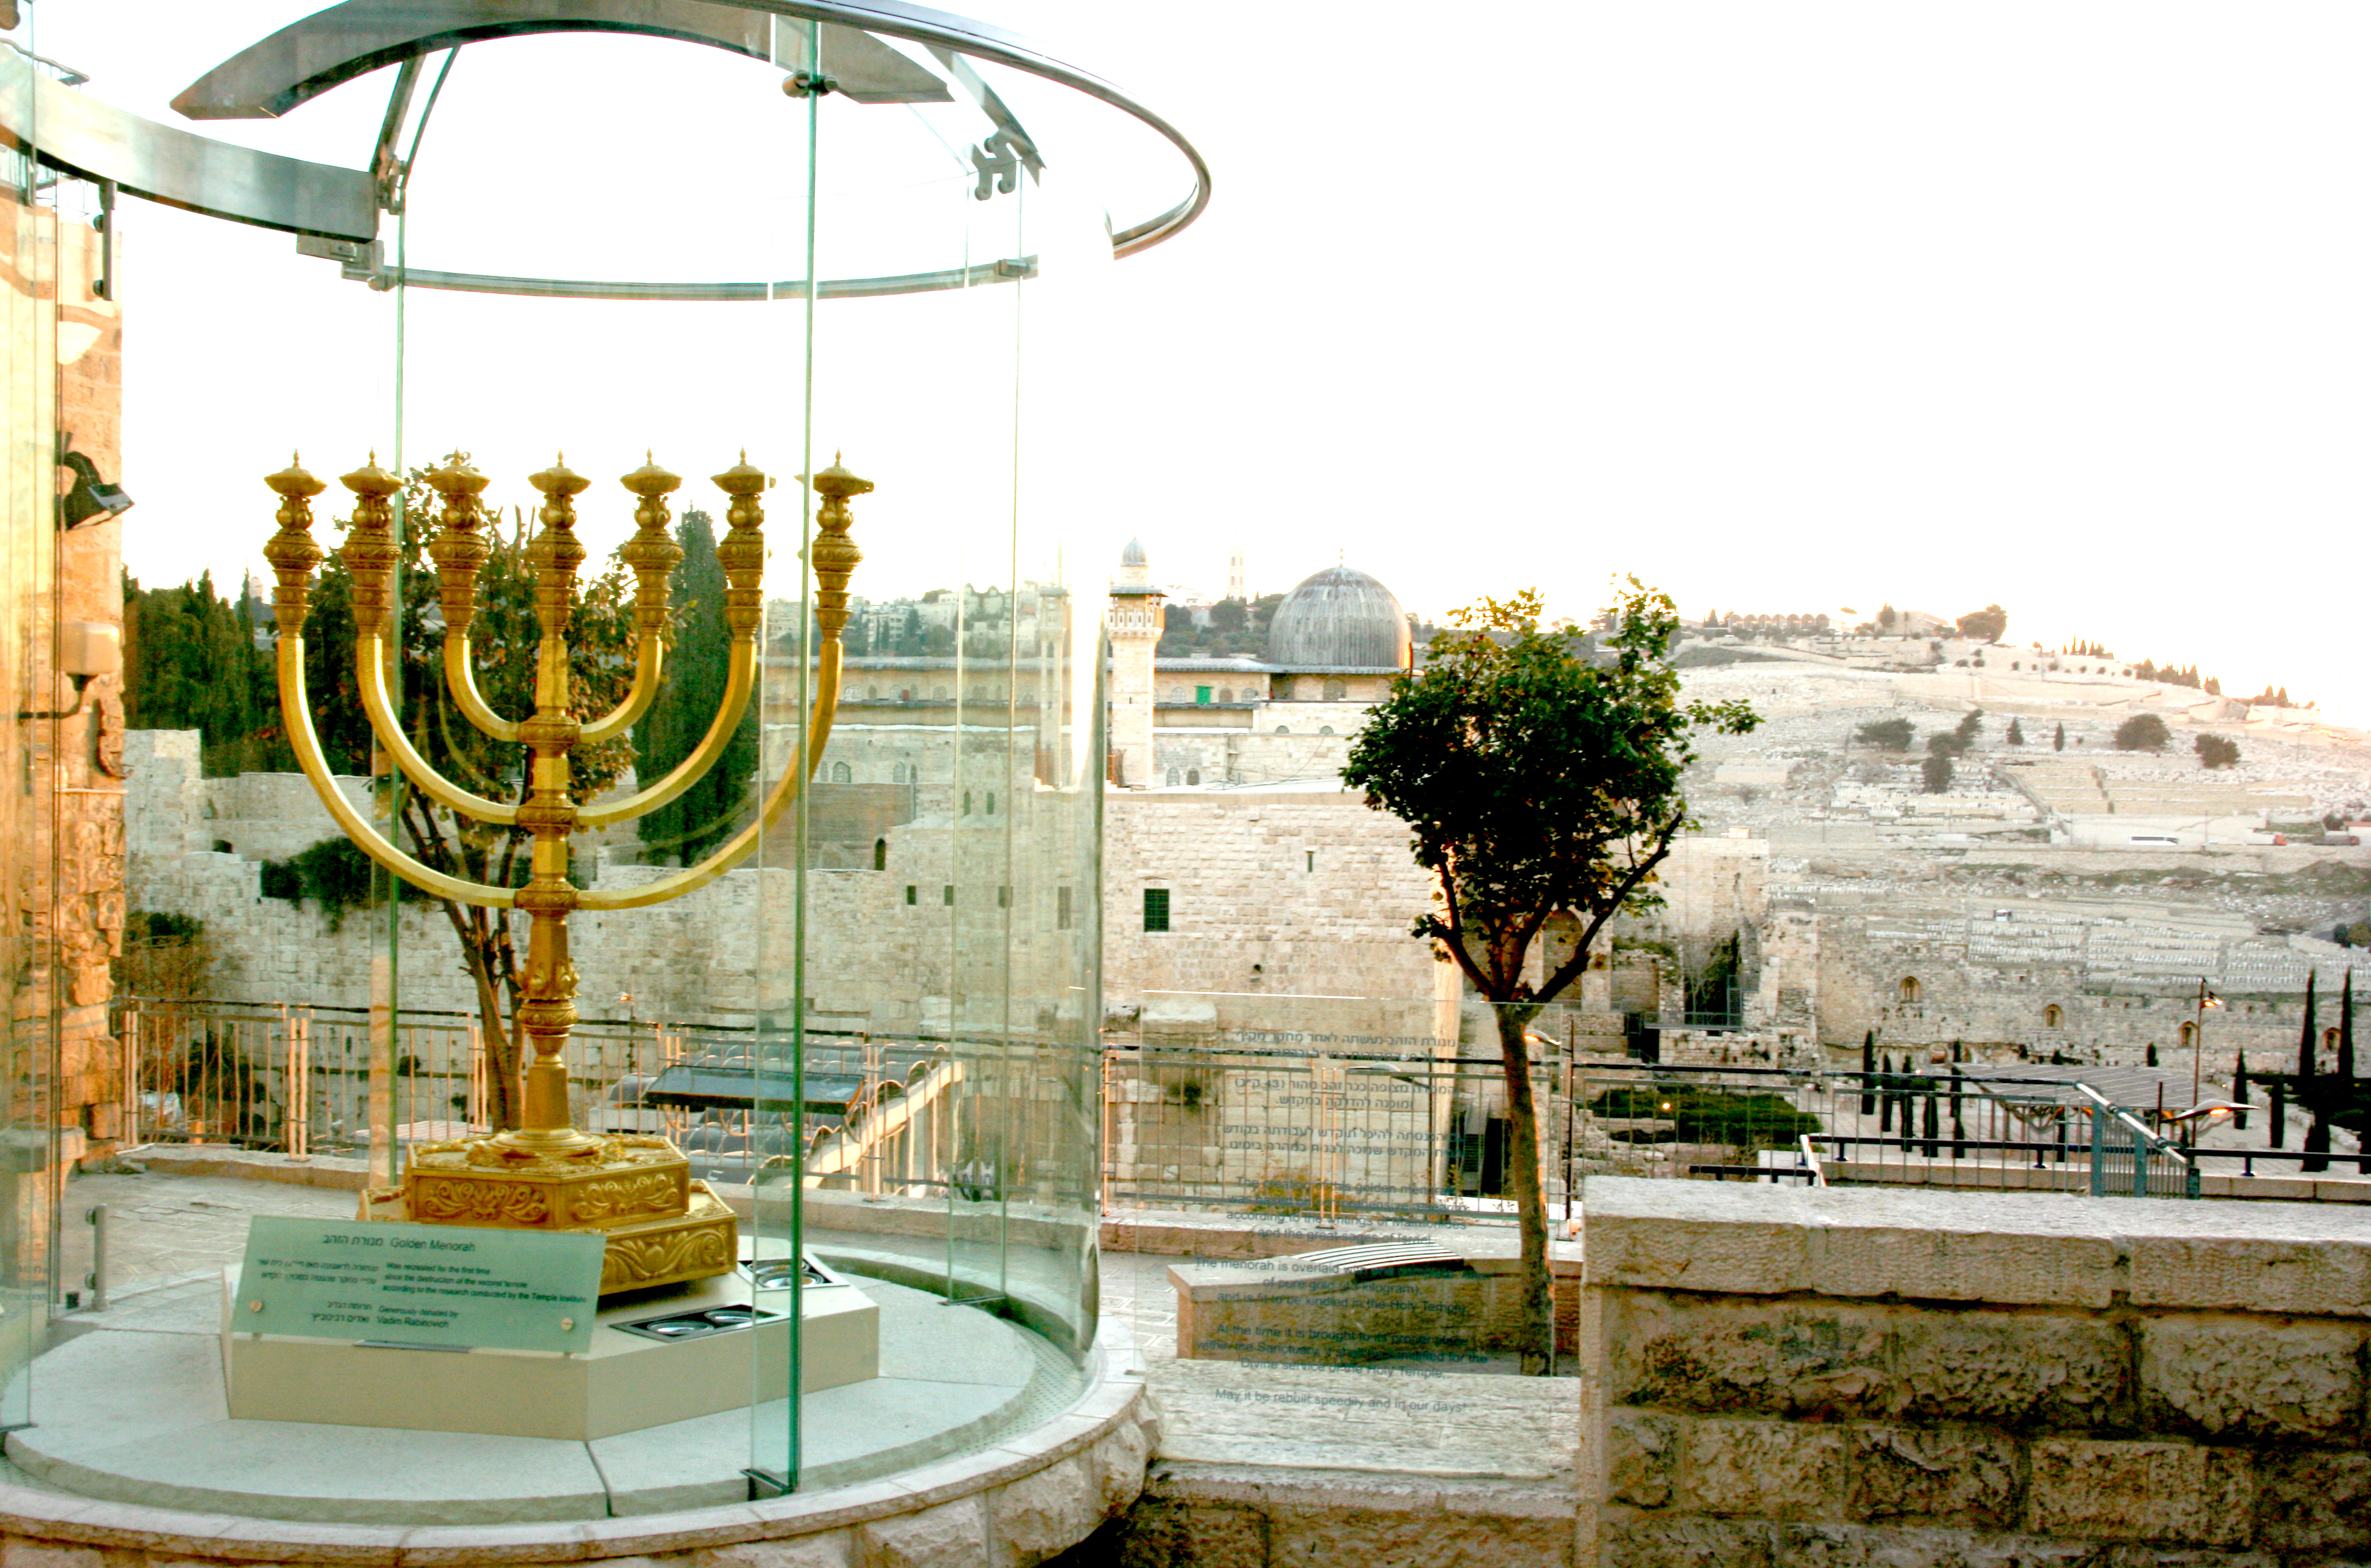 A reconstruction of the golden Menorah, made by the Temple Mount Institute:  According to the Jewish historian Josephus, the Roman legions took the Menorah to Rome, Italy in AD 70, when the Temple was destroyed.